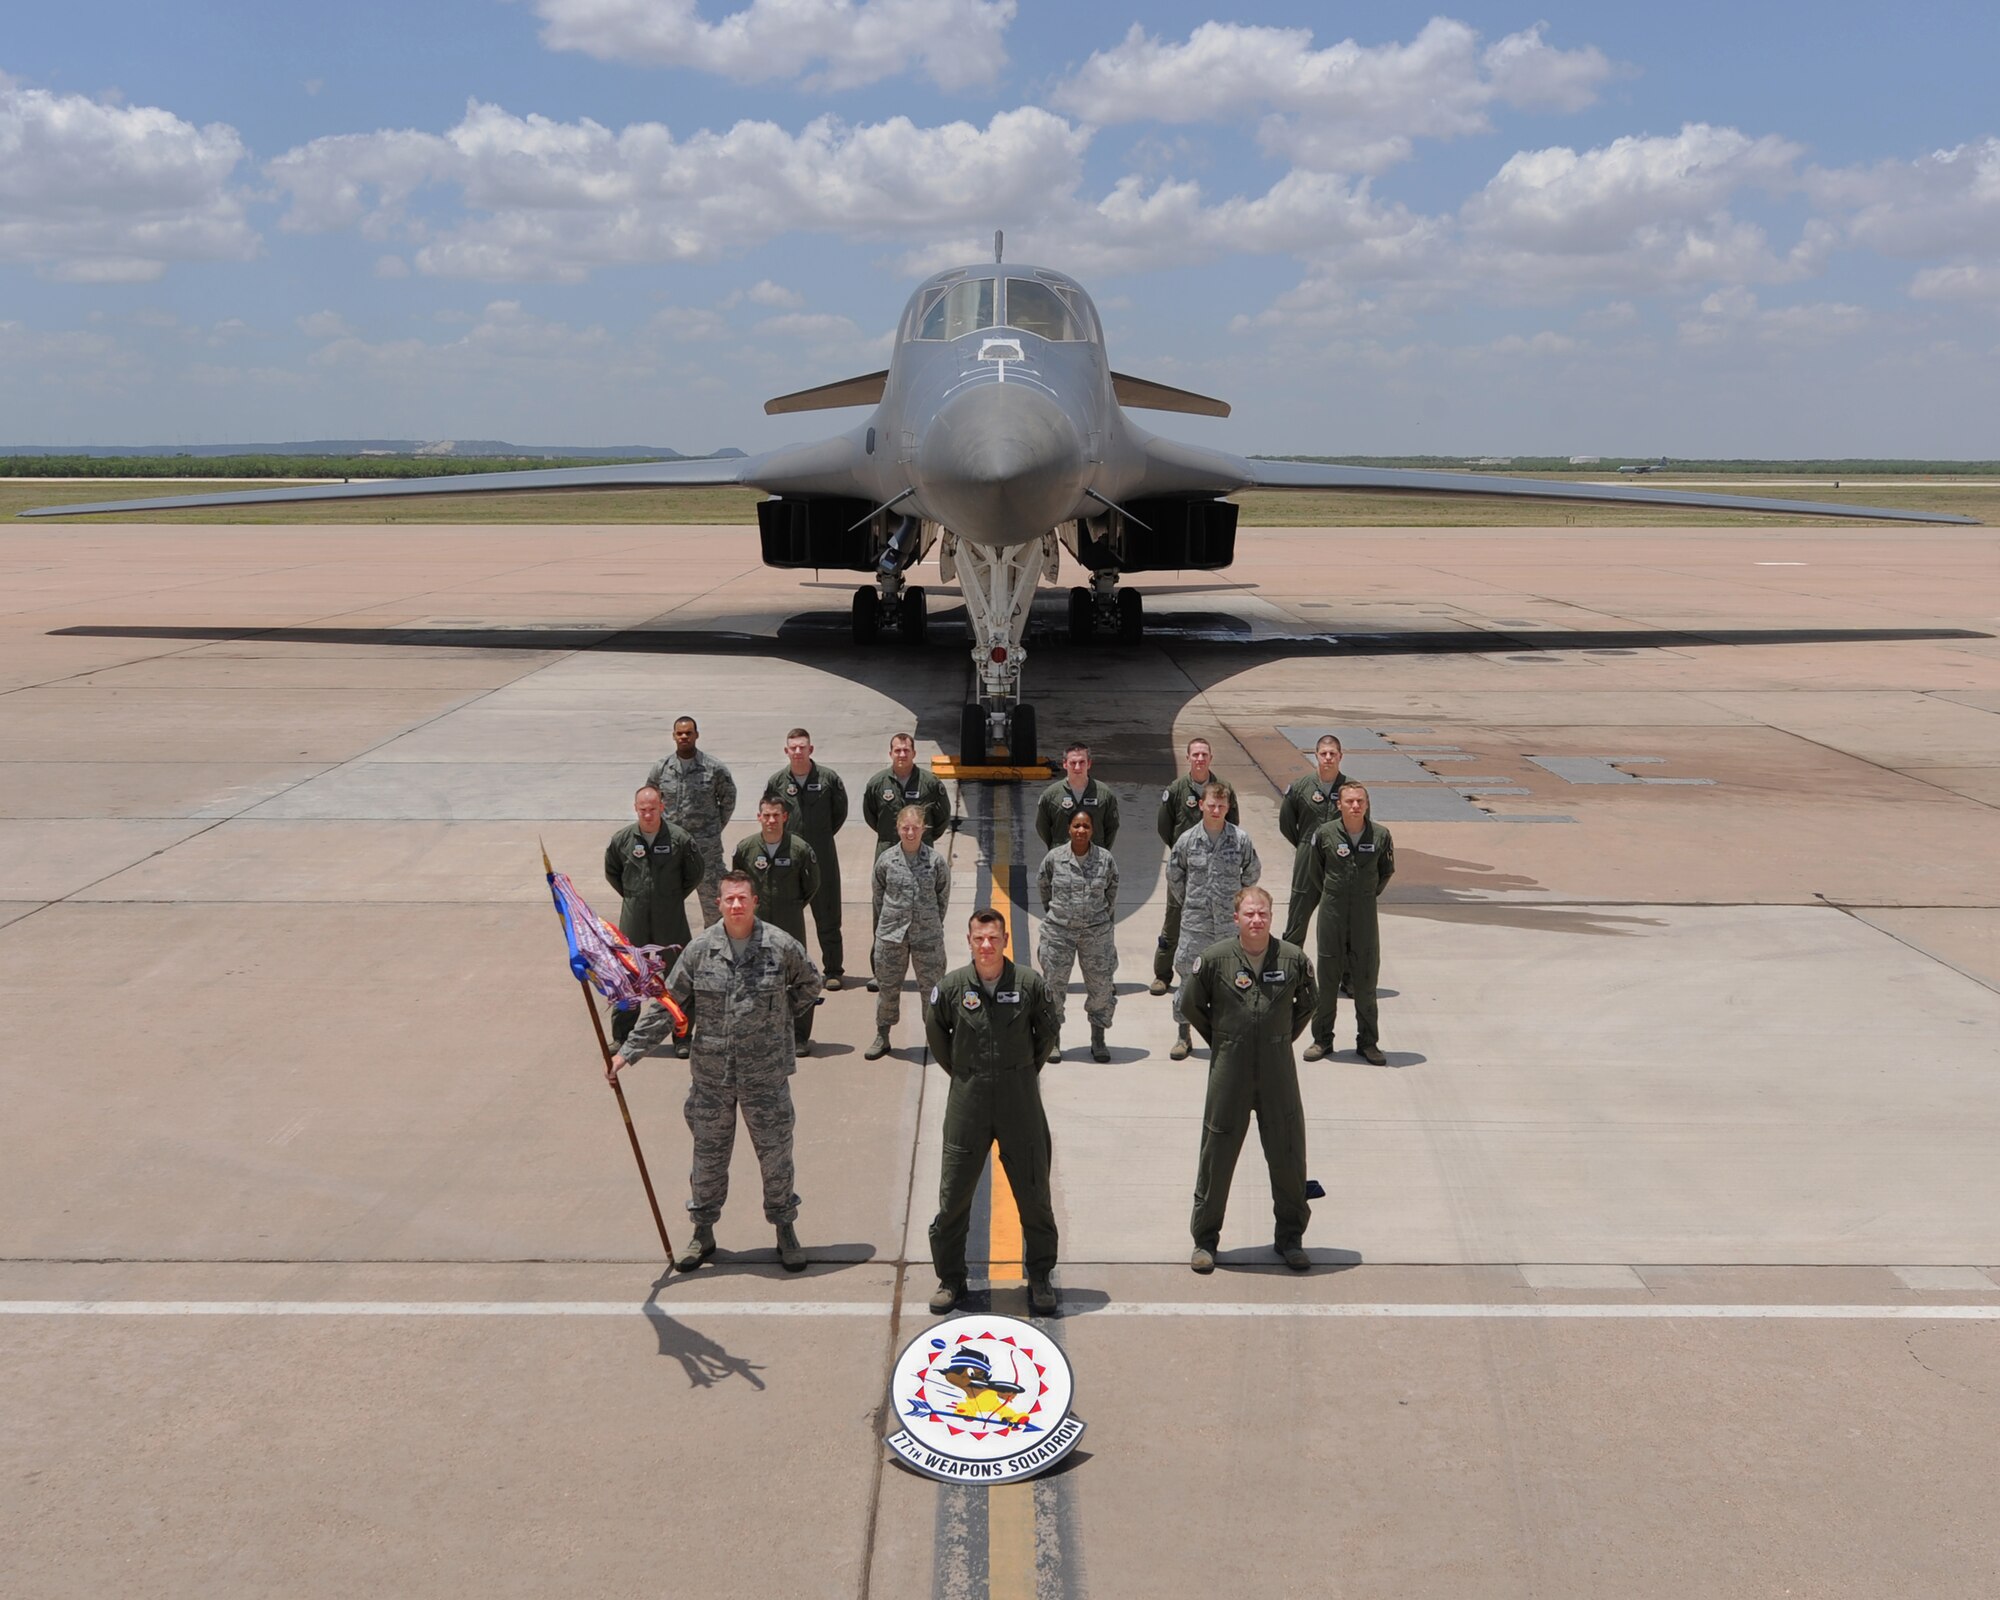 The 77th Weapons Squadron (WPS) poses for a squadron photo in front of a B-1 Bomber April 15, 2013, at Dyess Air Force Base, Texas. The 77th WPS is one of the oldest and most decorated bombardment squadrons in the U.S. Air Force. It provides weapons training to B-1 Bomber squadrons at Dyess AFB and Ellsworth AFB, S.D. (Courtesy photo)